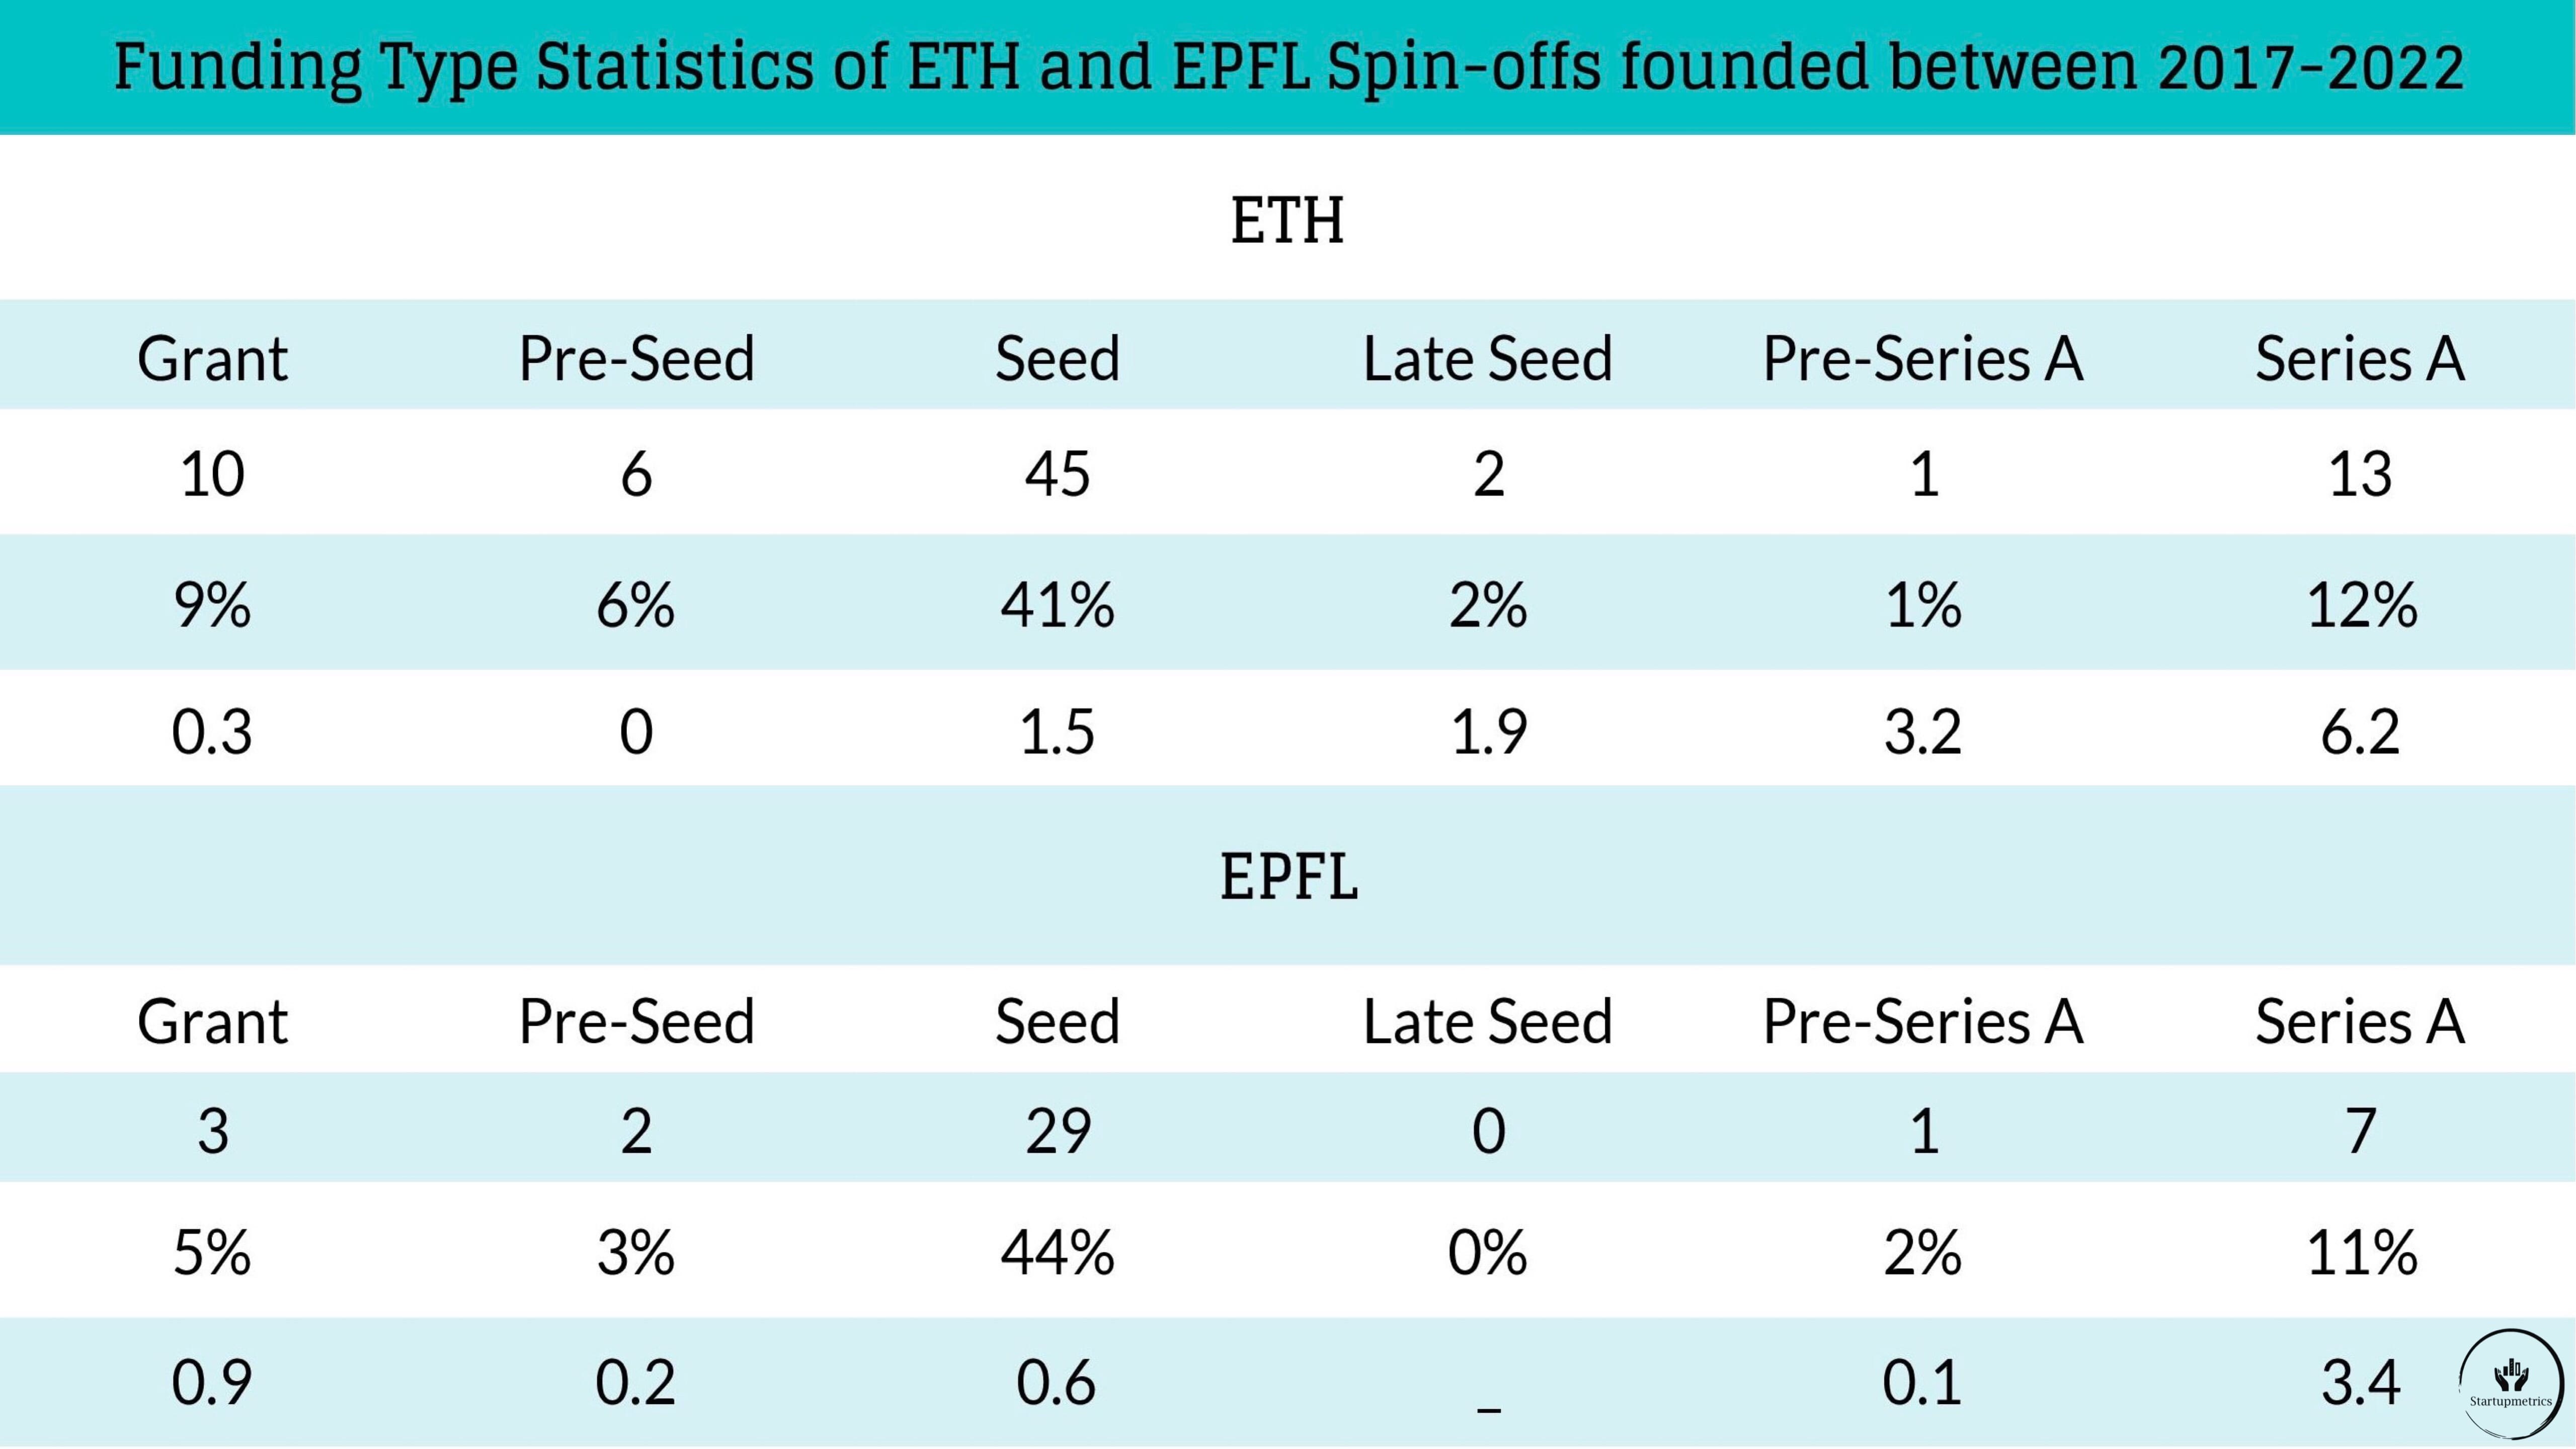 Funding Type Statistics of ETH & EPFL Spin-offs founded between 2017-2020